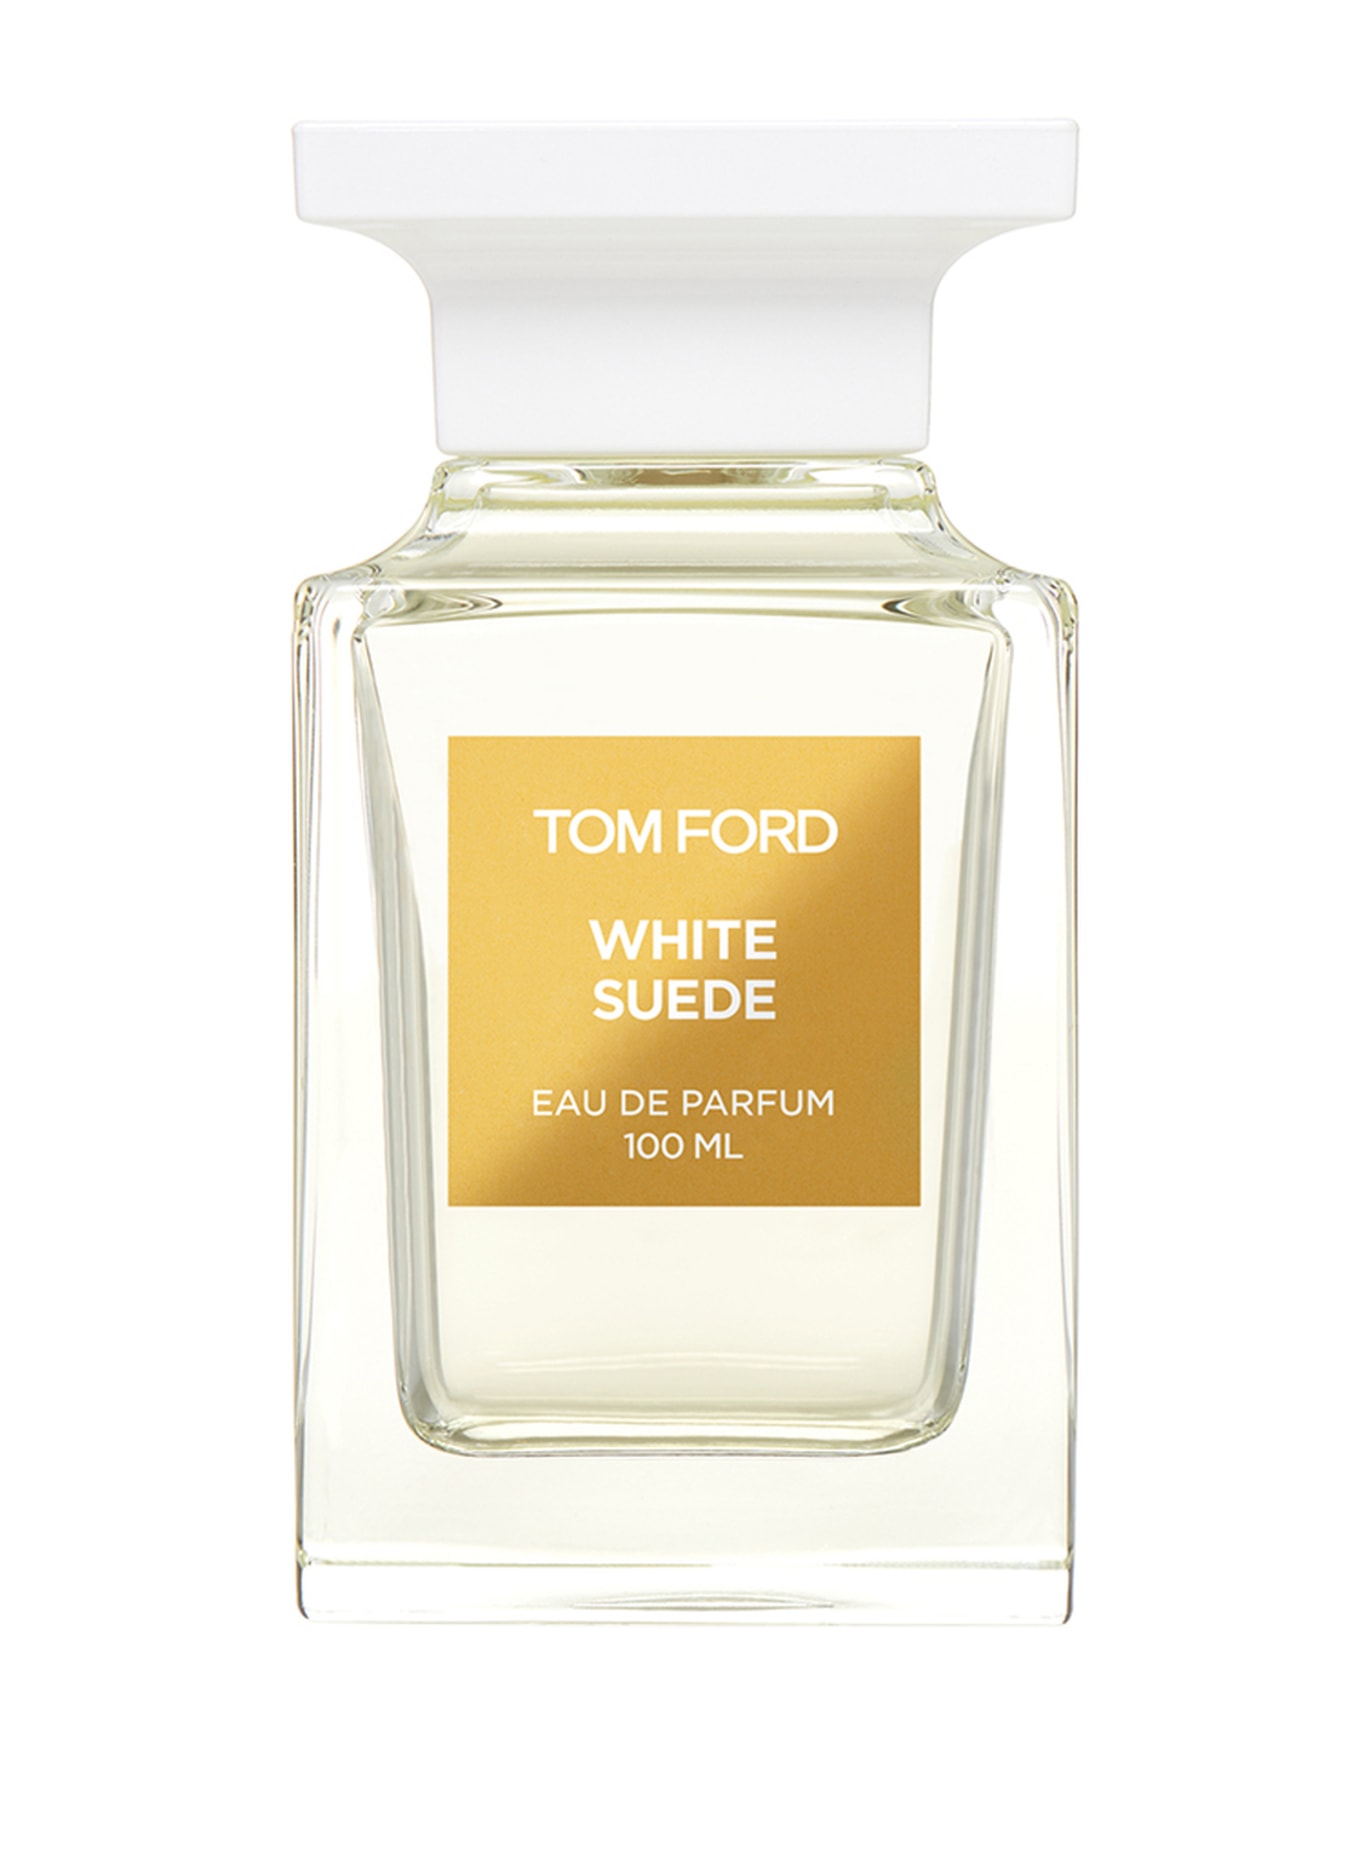 TOM FORD BEAUTY WHITE SUEDE(Obrazek null)